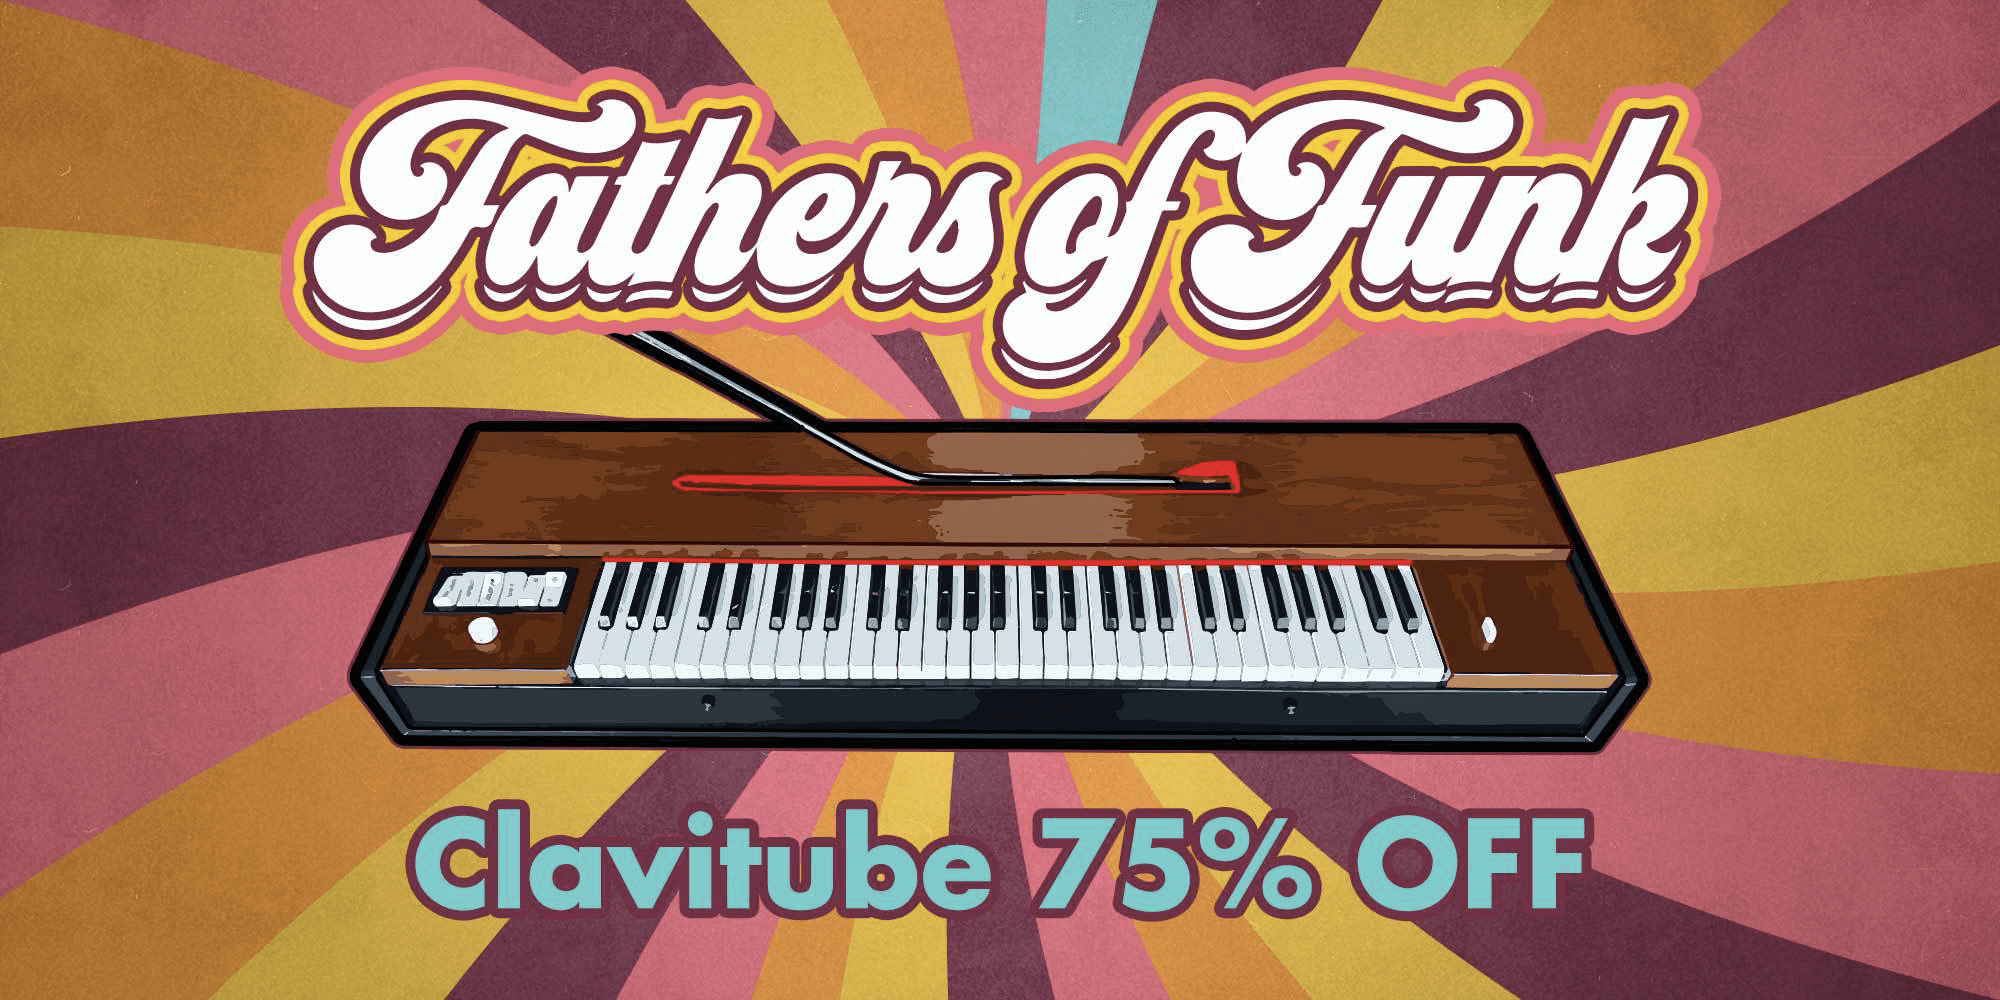 Fathers of Funk Krazy Deal – SAVE 75% on Clavitube Collection